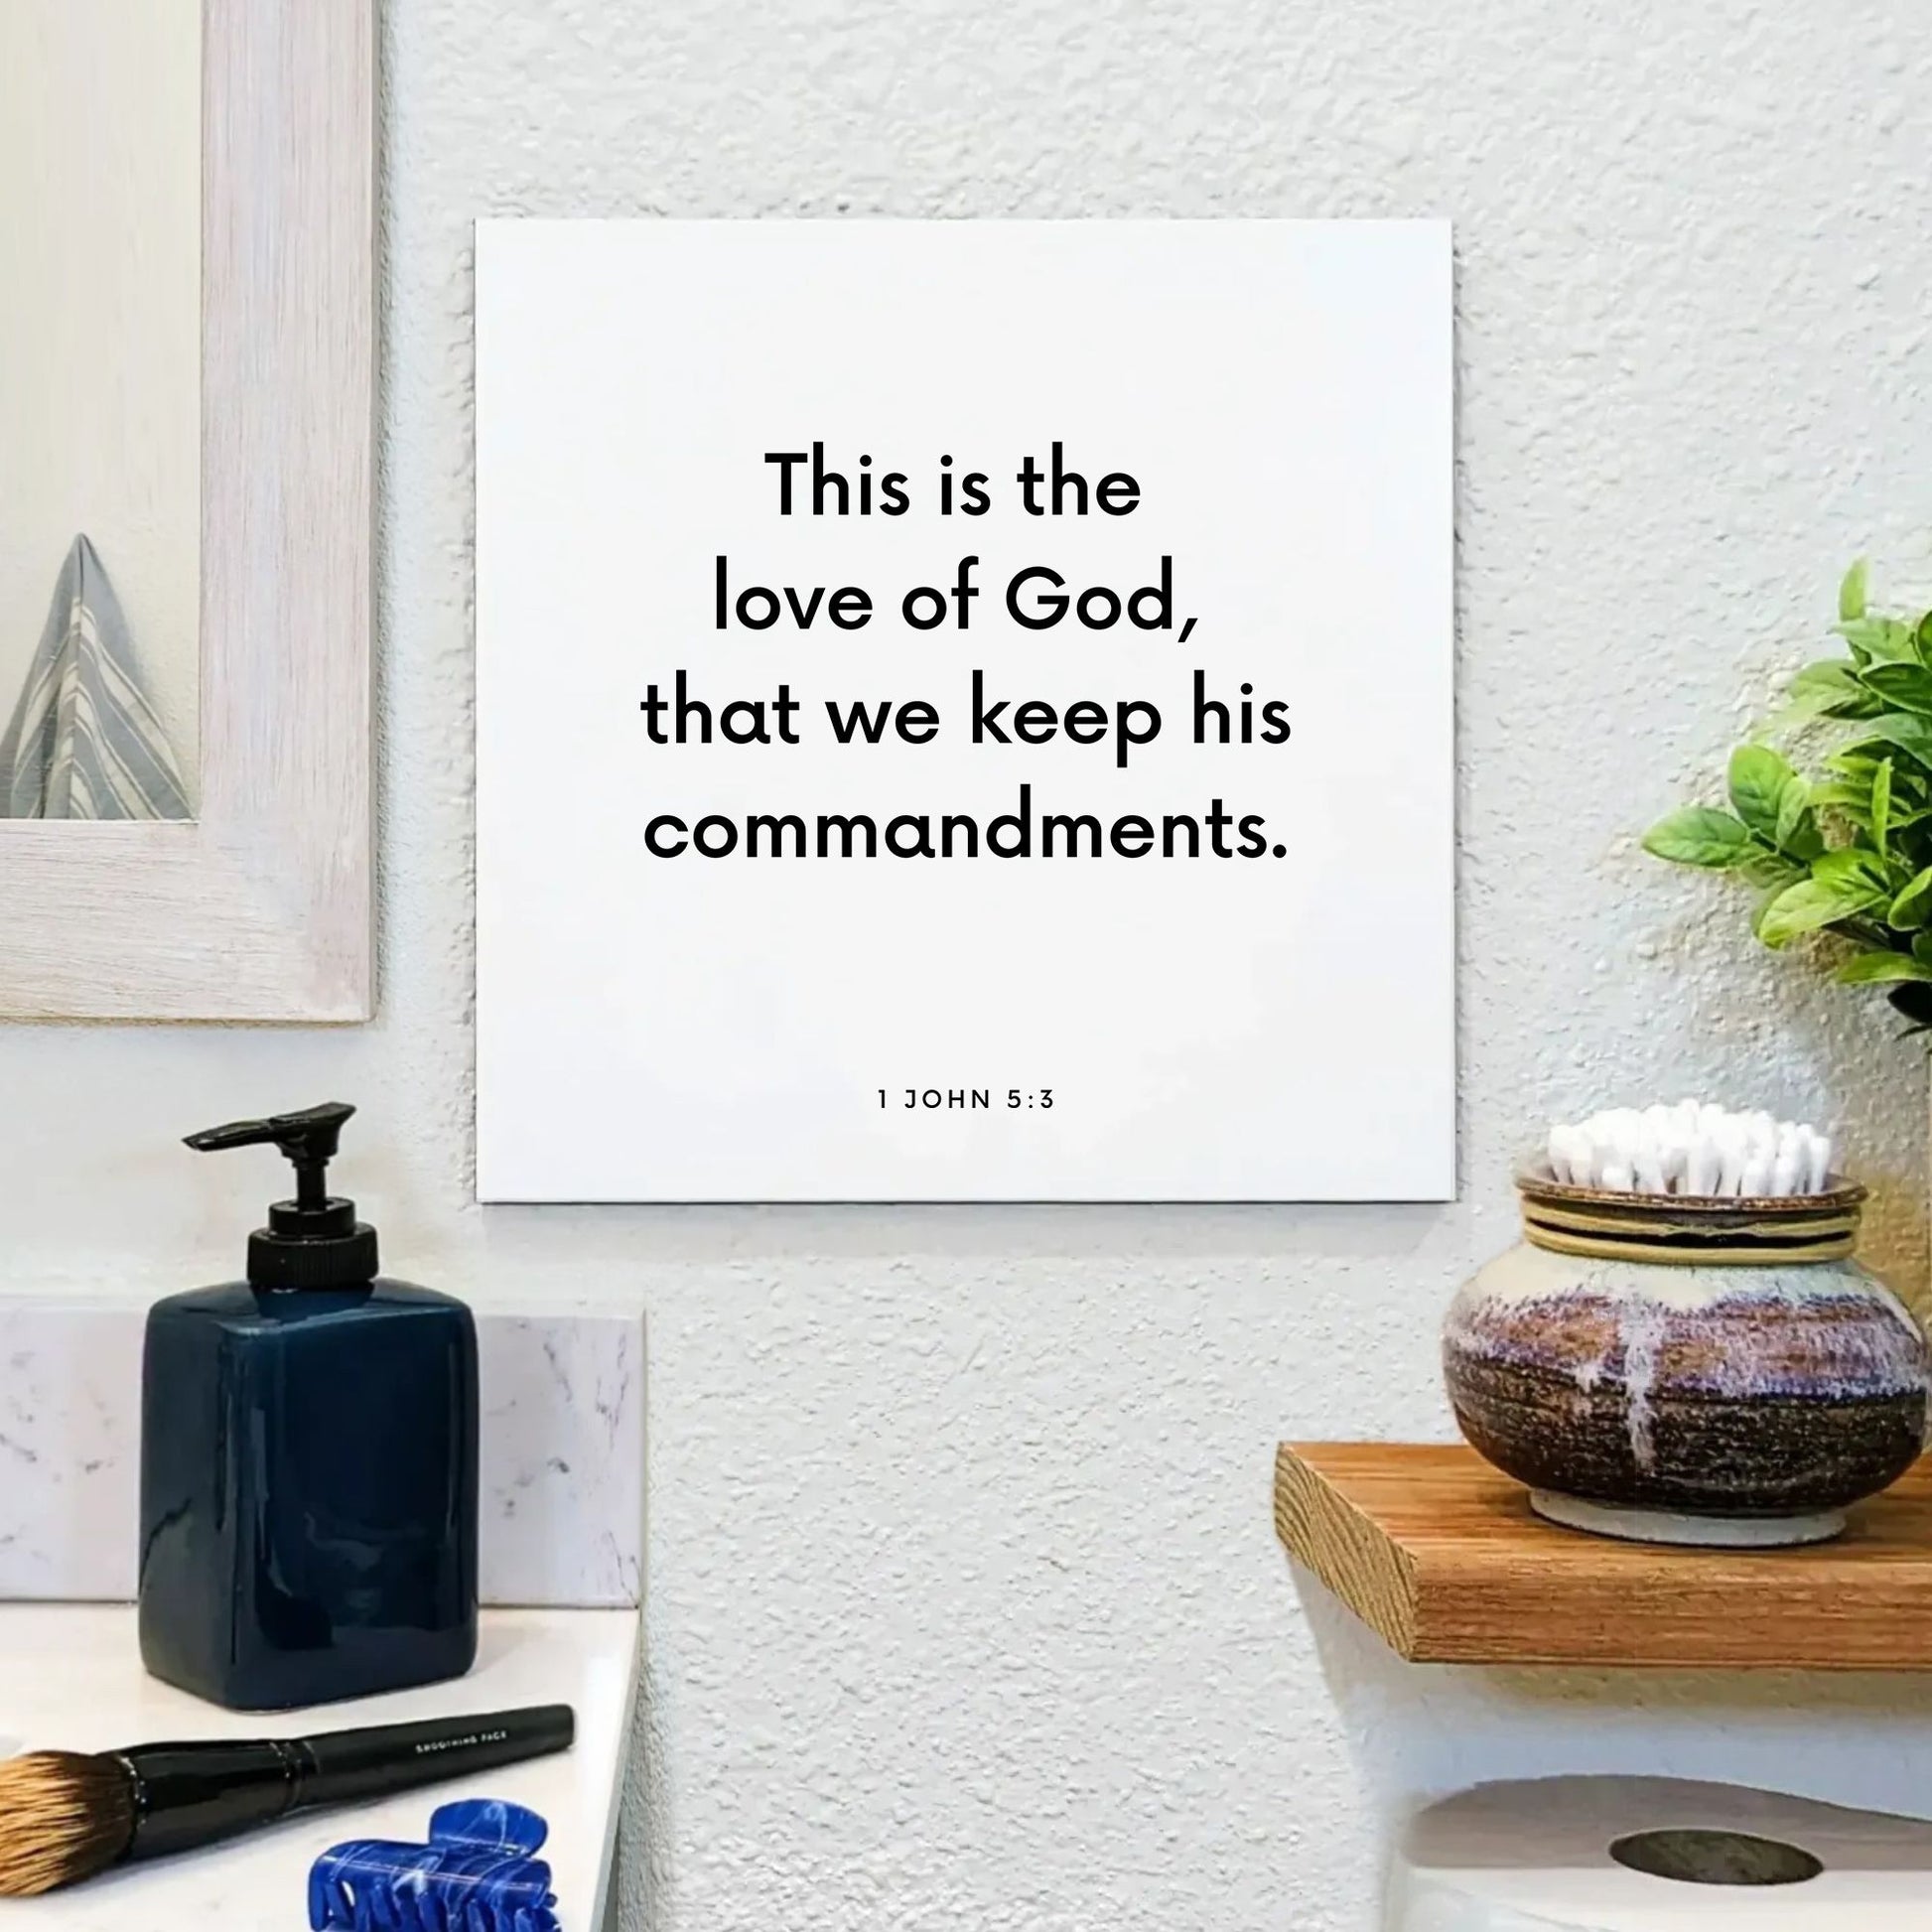 Bathroom mouting of the scripture tile for 1 John 5:3 - "This is the love of God, that we keep his commandments"